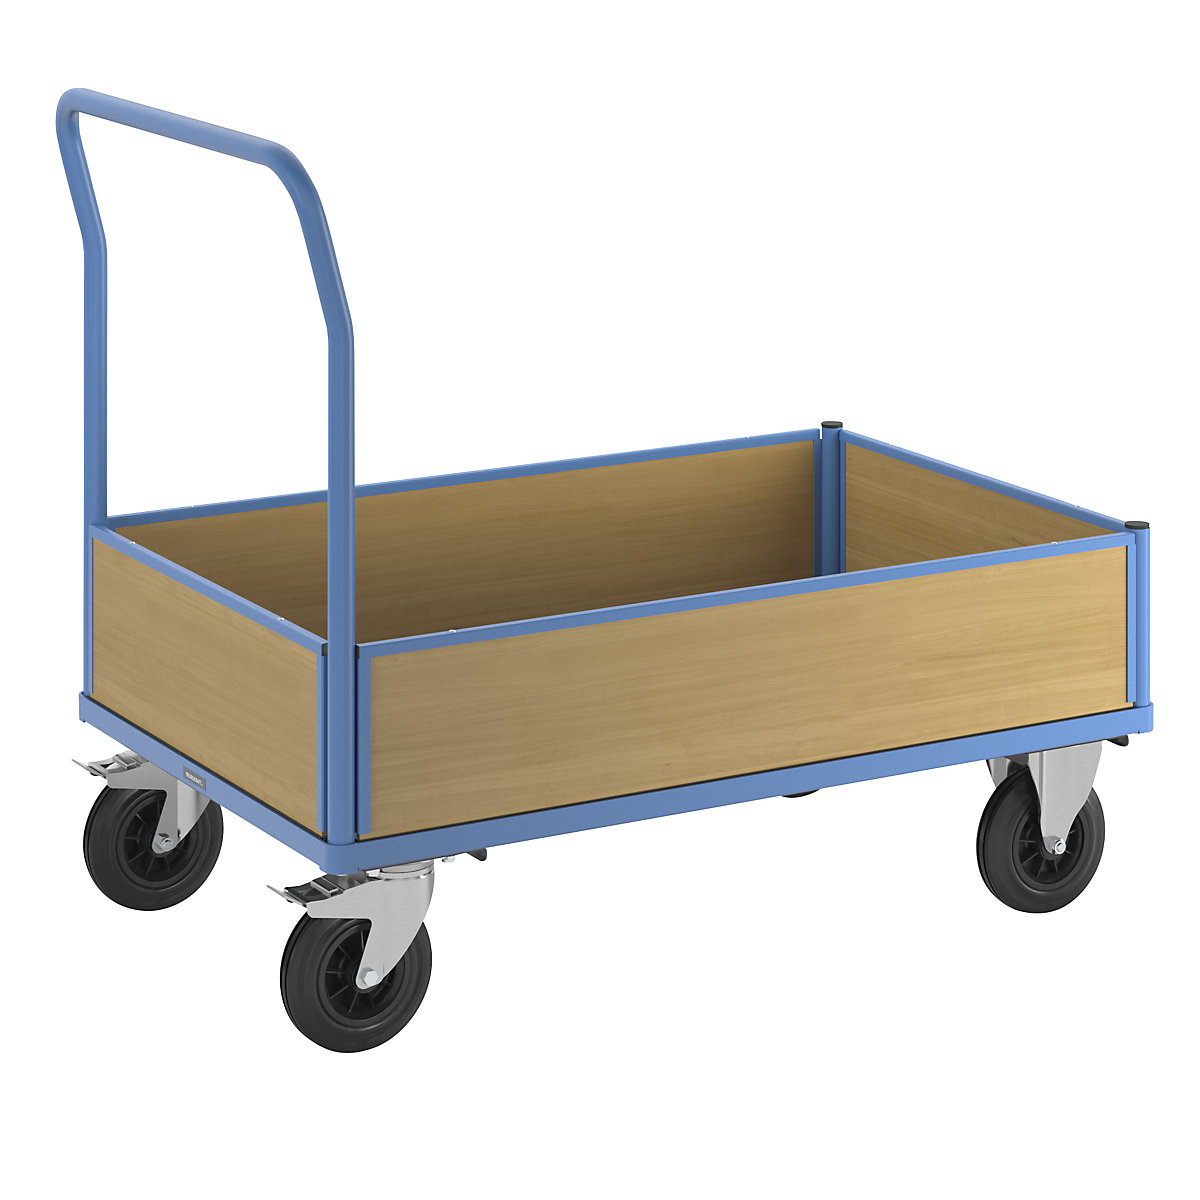 Platform truck with wooden panels – eurokraft pro, with 4 half height side panels, LxW 1250 x 800 mm, solid rubber tyres-10